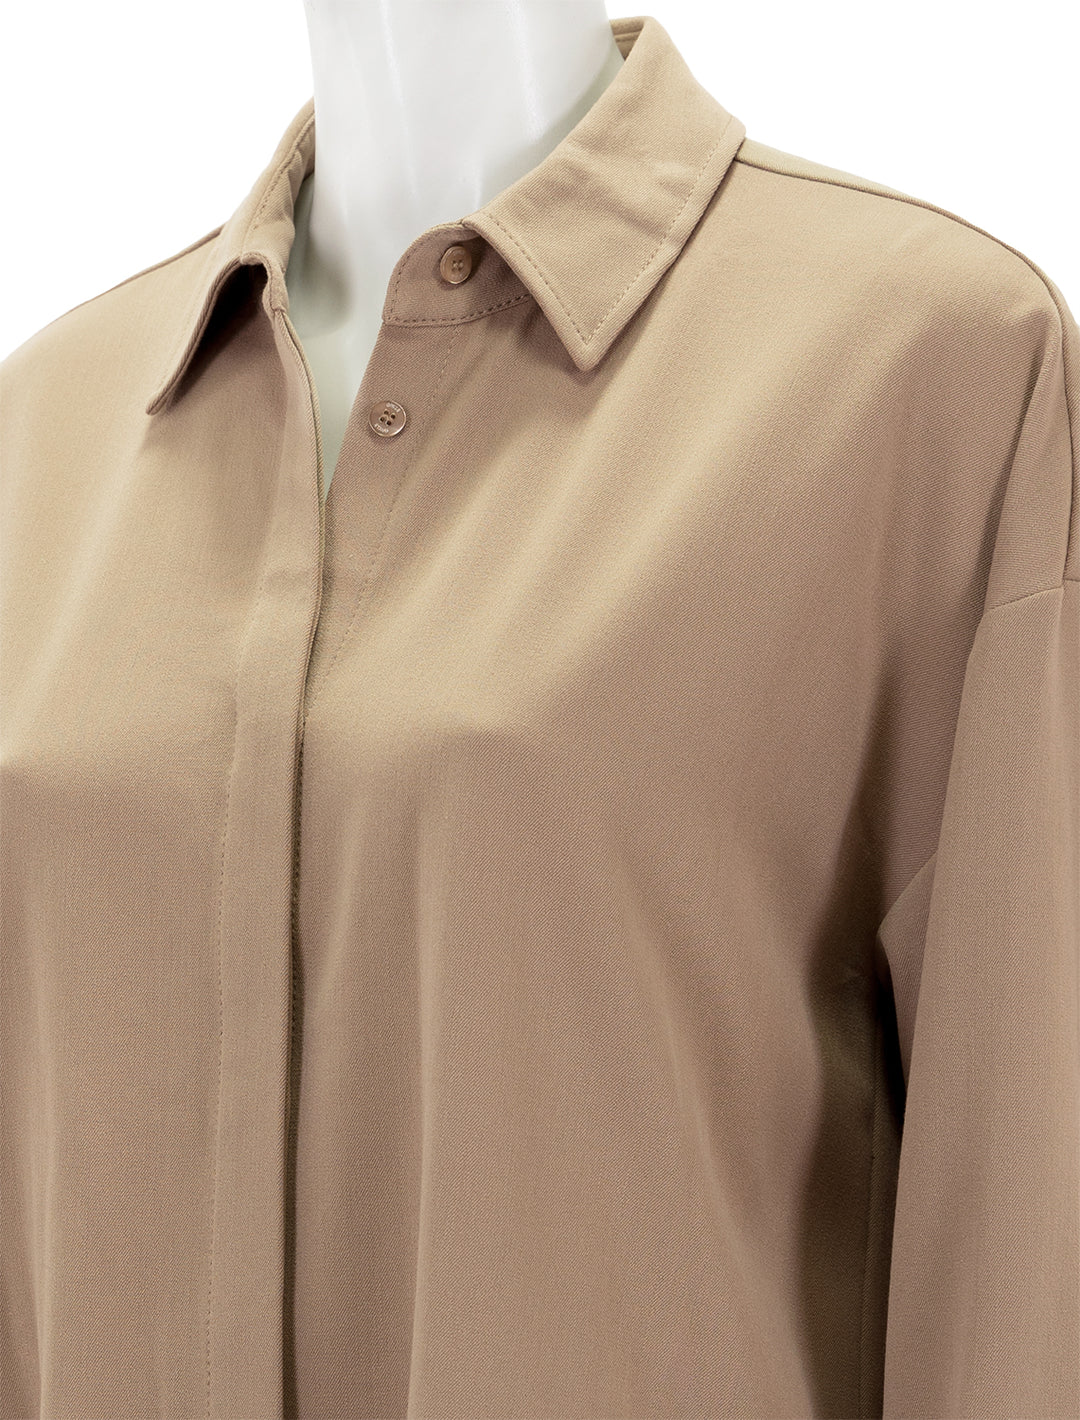 Close-up view of STAUD's Colton Shirt in Camel.